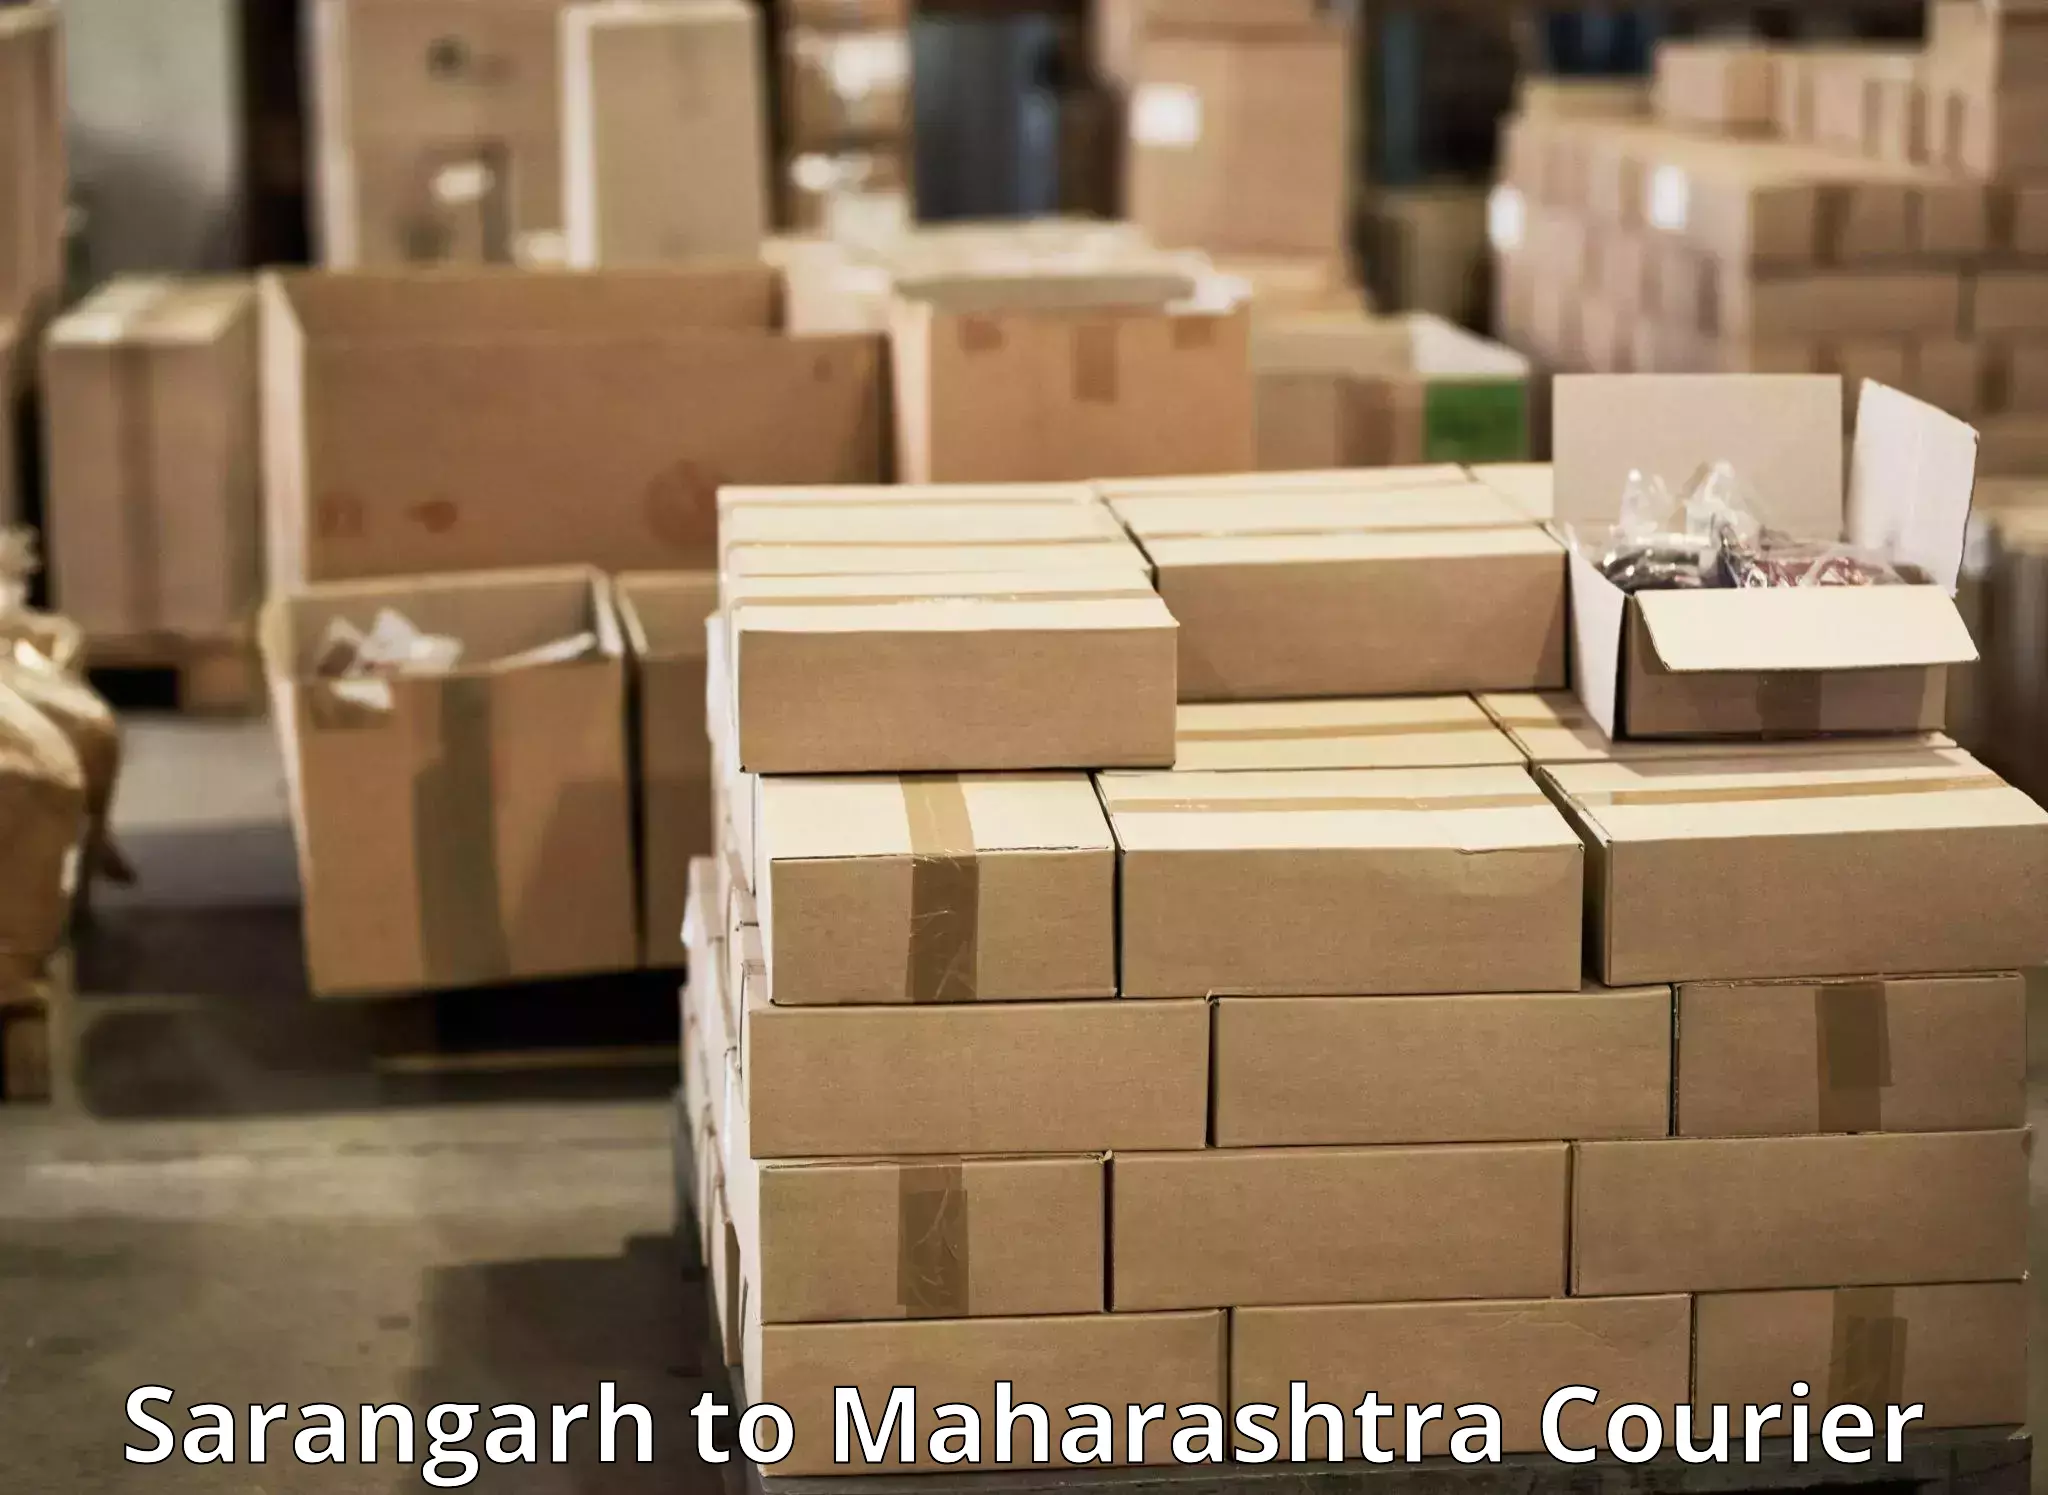 Express delivery network in Sarangarh to Mumbai Port